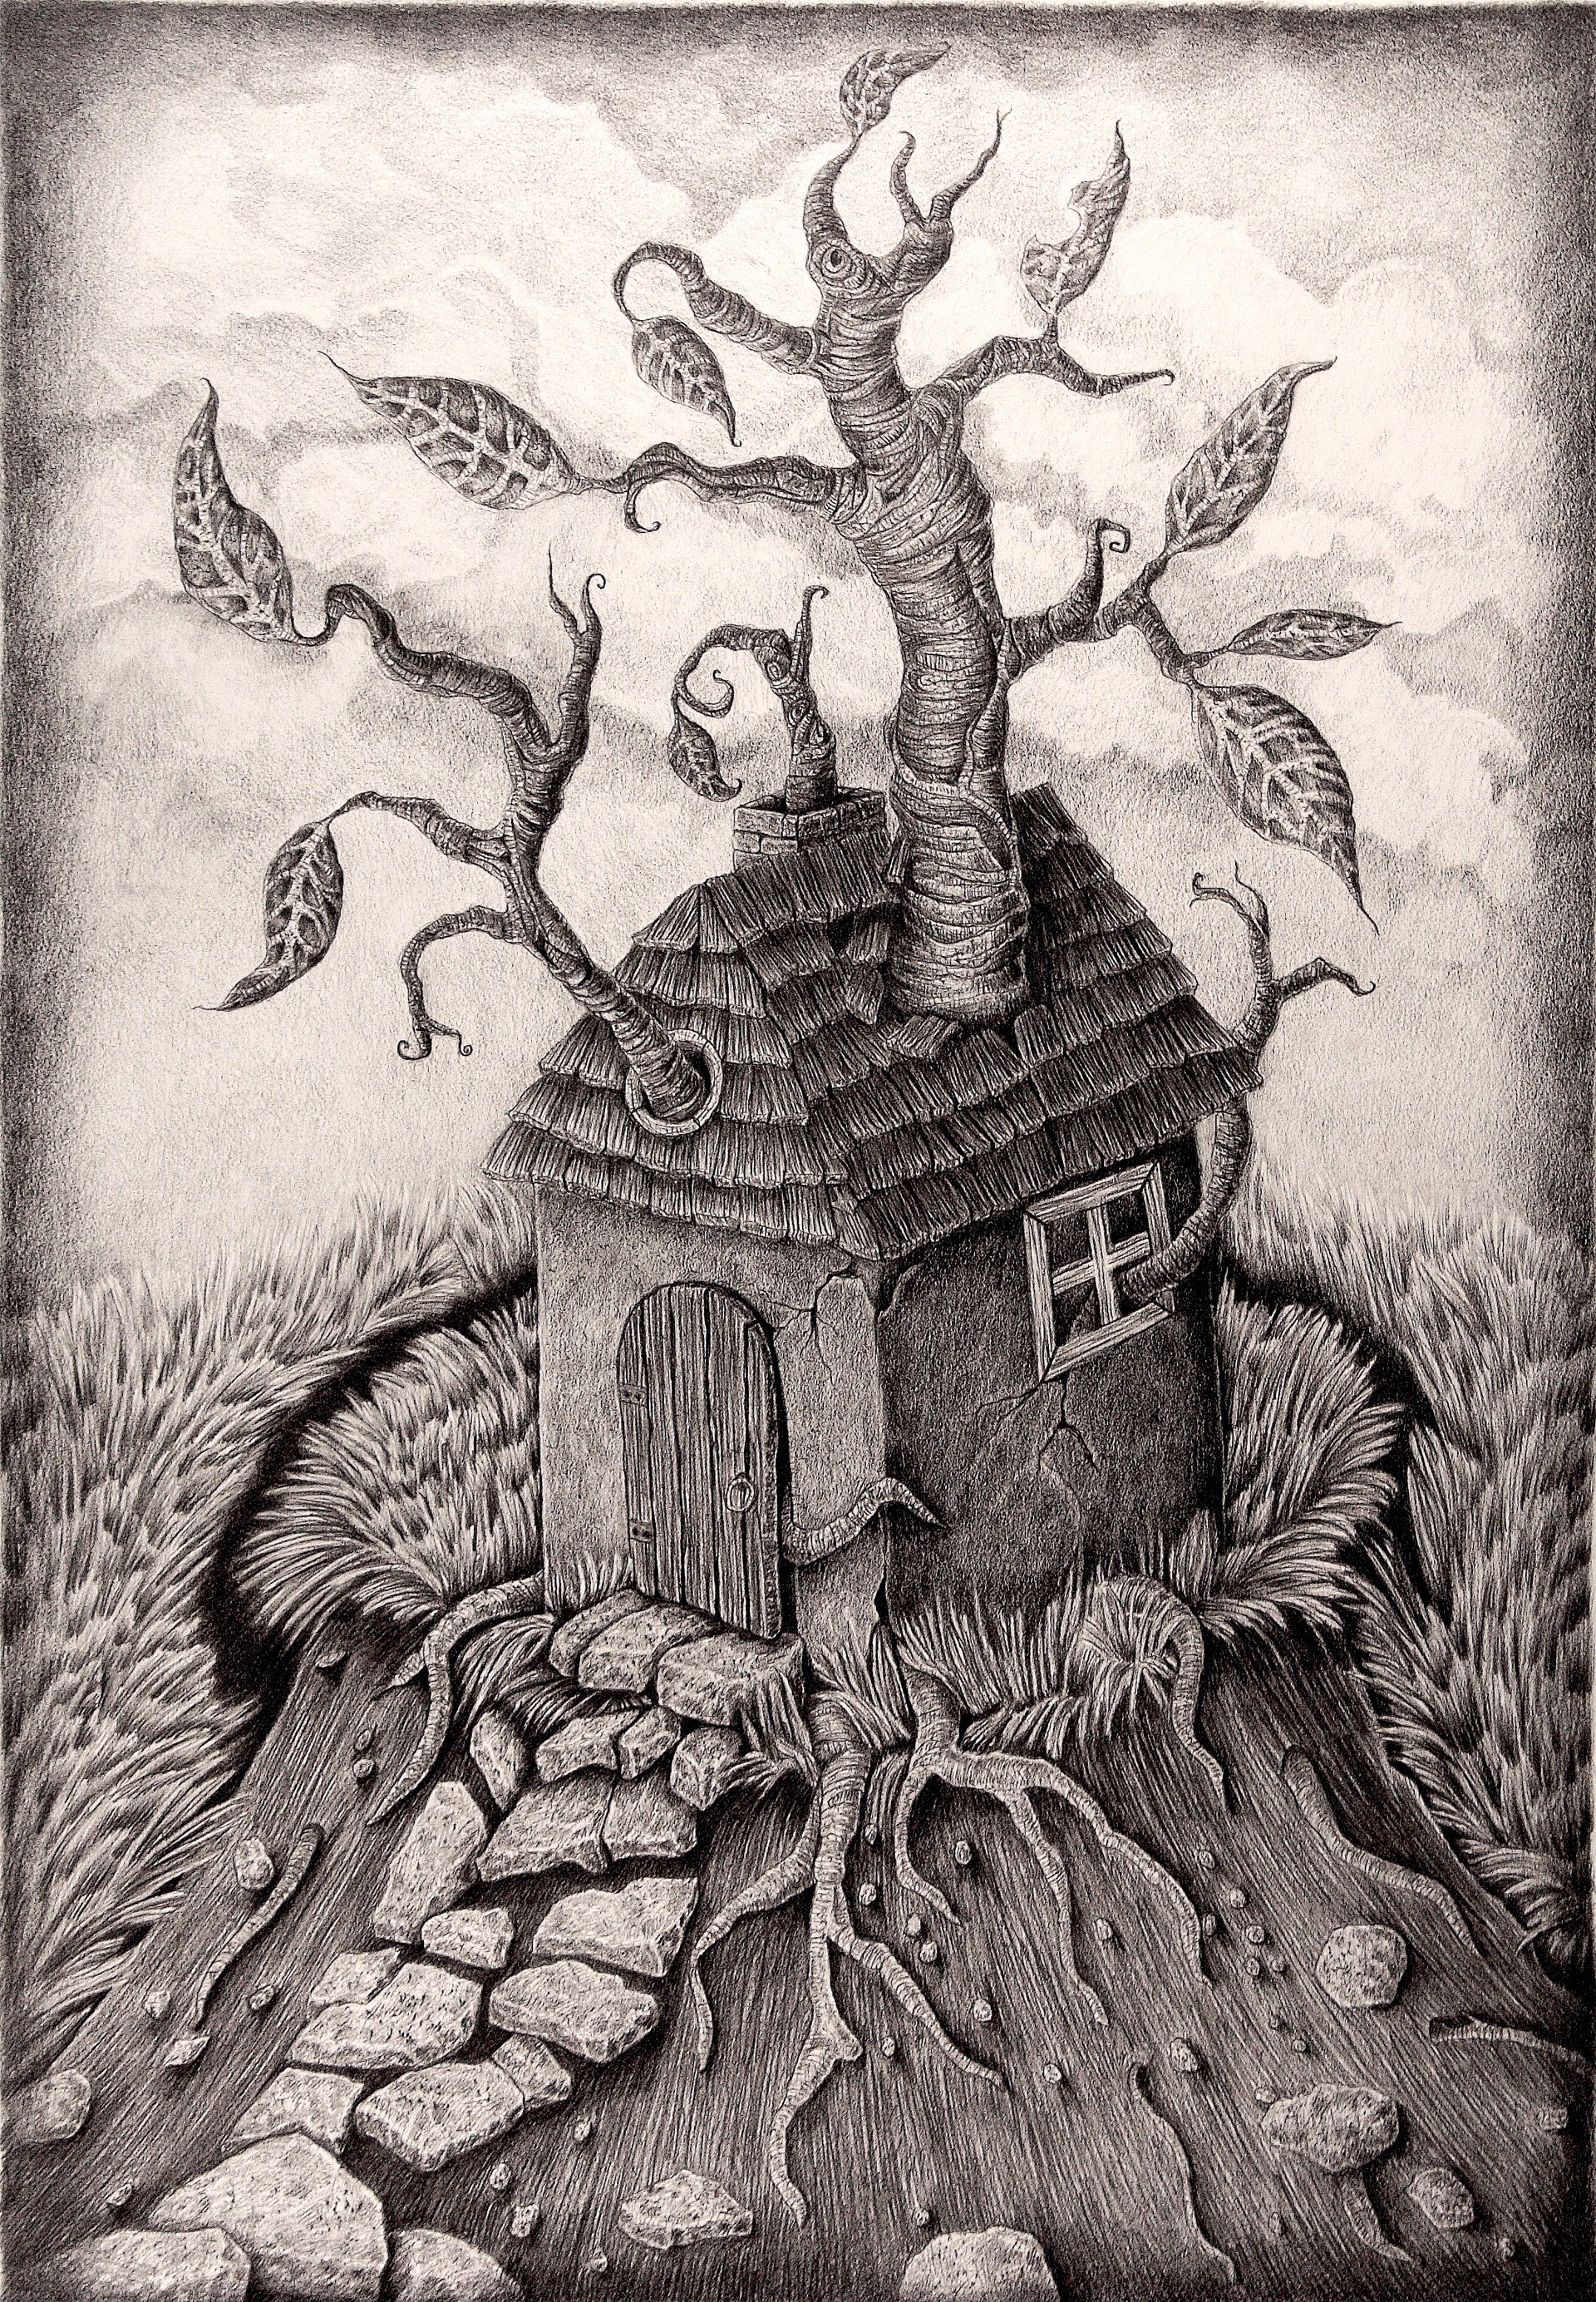 The Sprouted House by Kathleen Powers